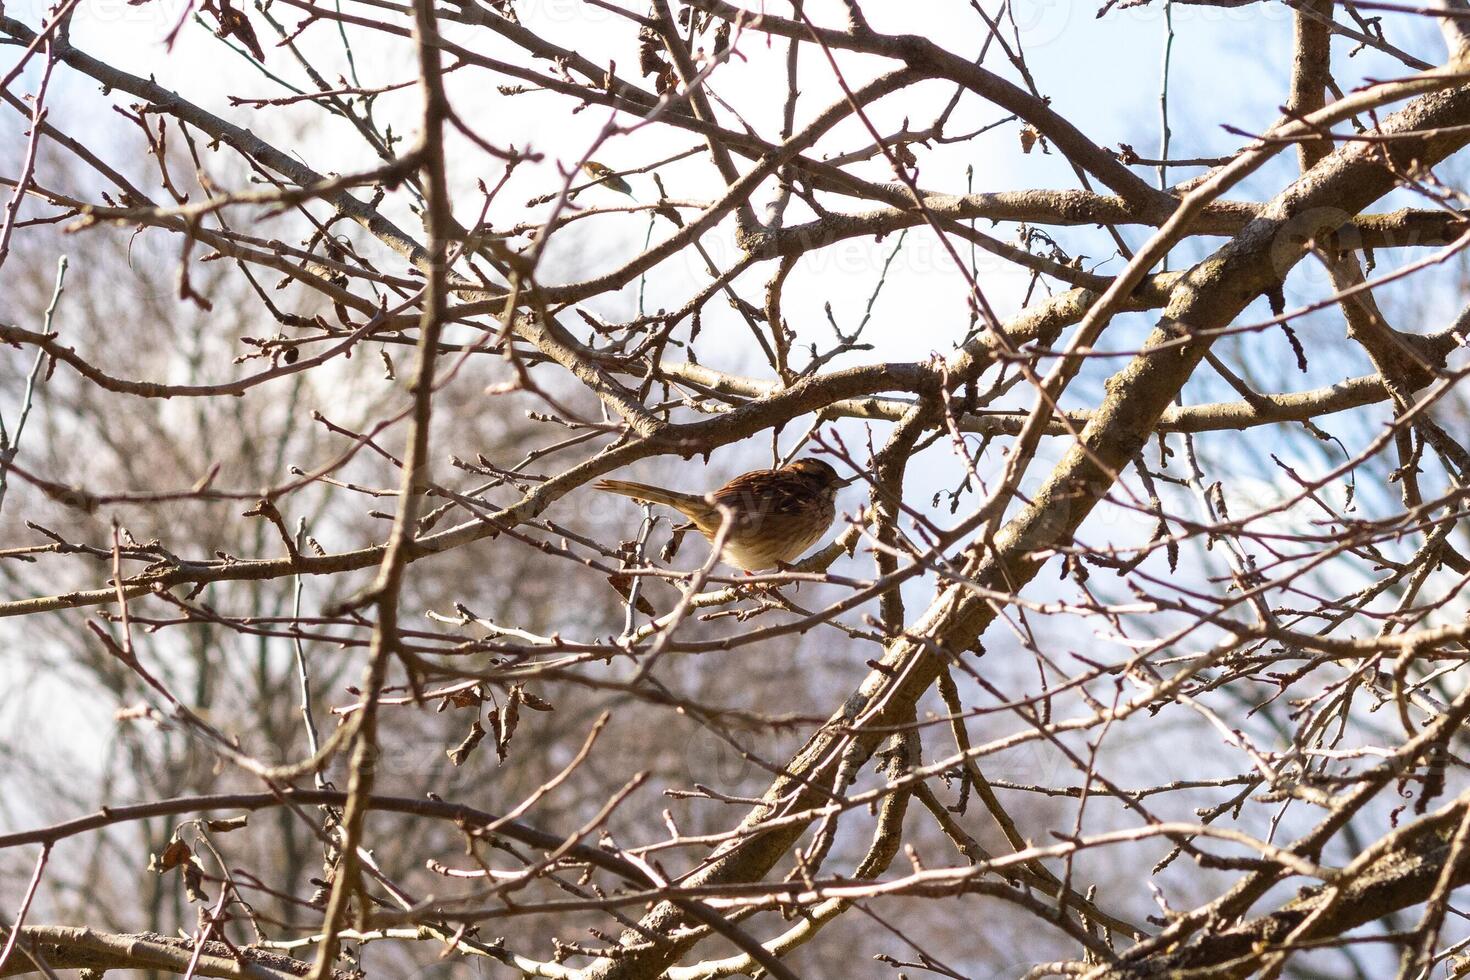 This cute little sparrow sat perched in the tree. The small bird with brown feathers is trying to hide and stay safe. These are songbirds and sound so pretty. The branches are without leaves. photo